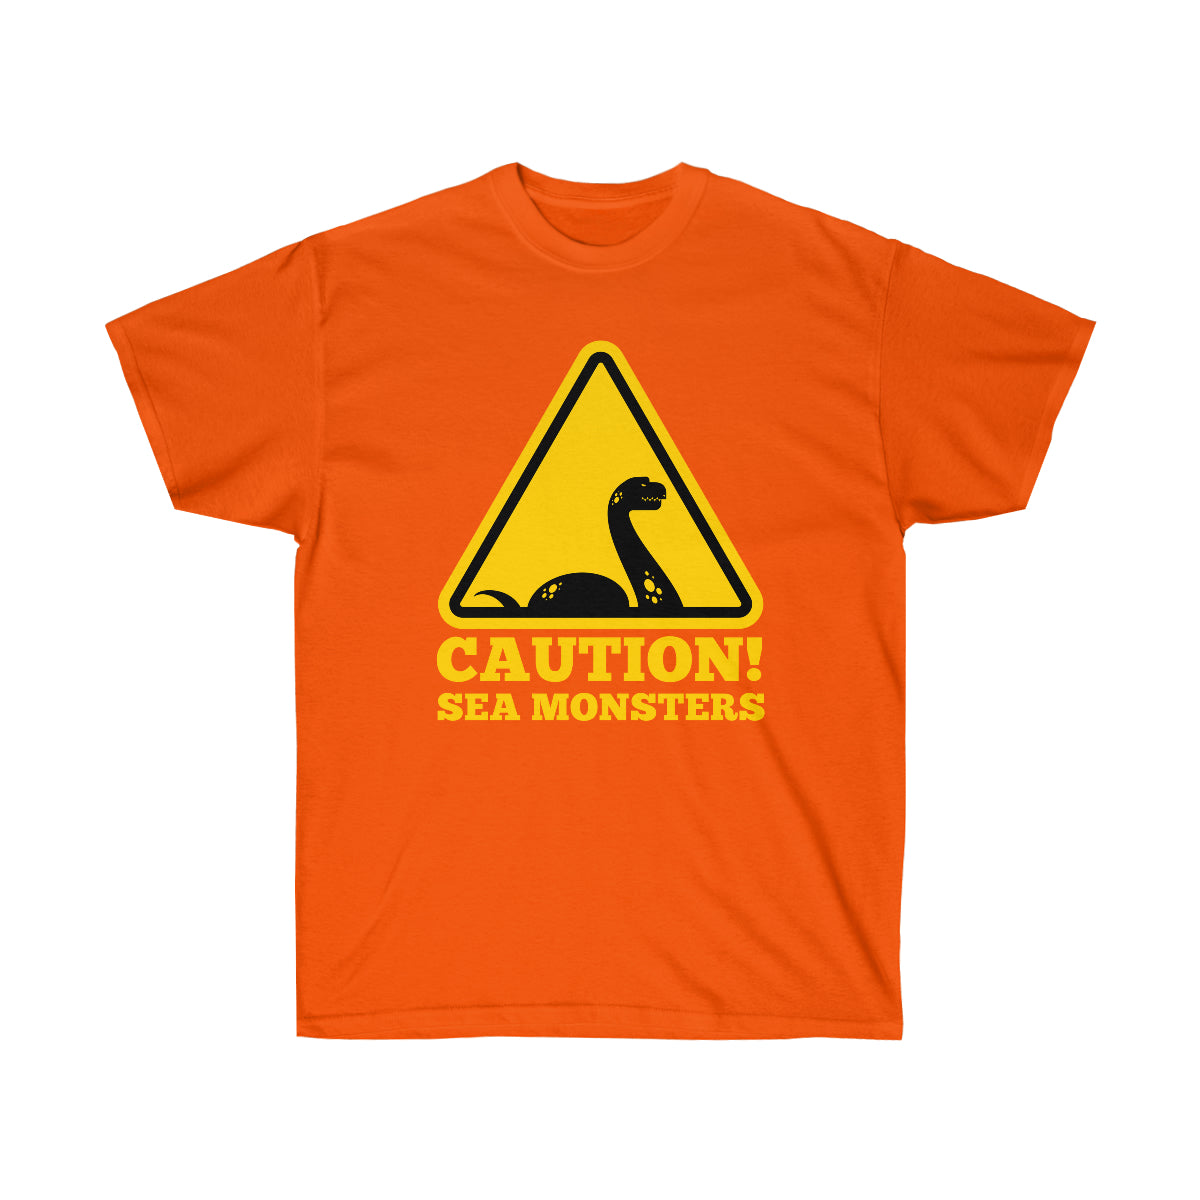 'Caution! Sea Monsters' Ultra Cotton Tee